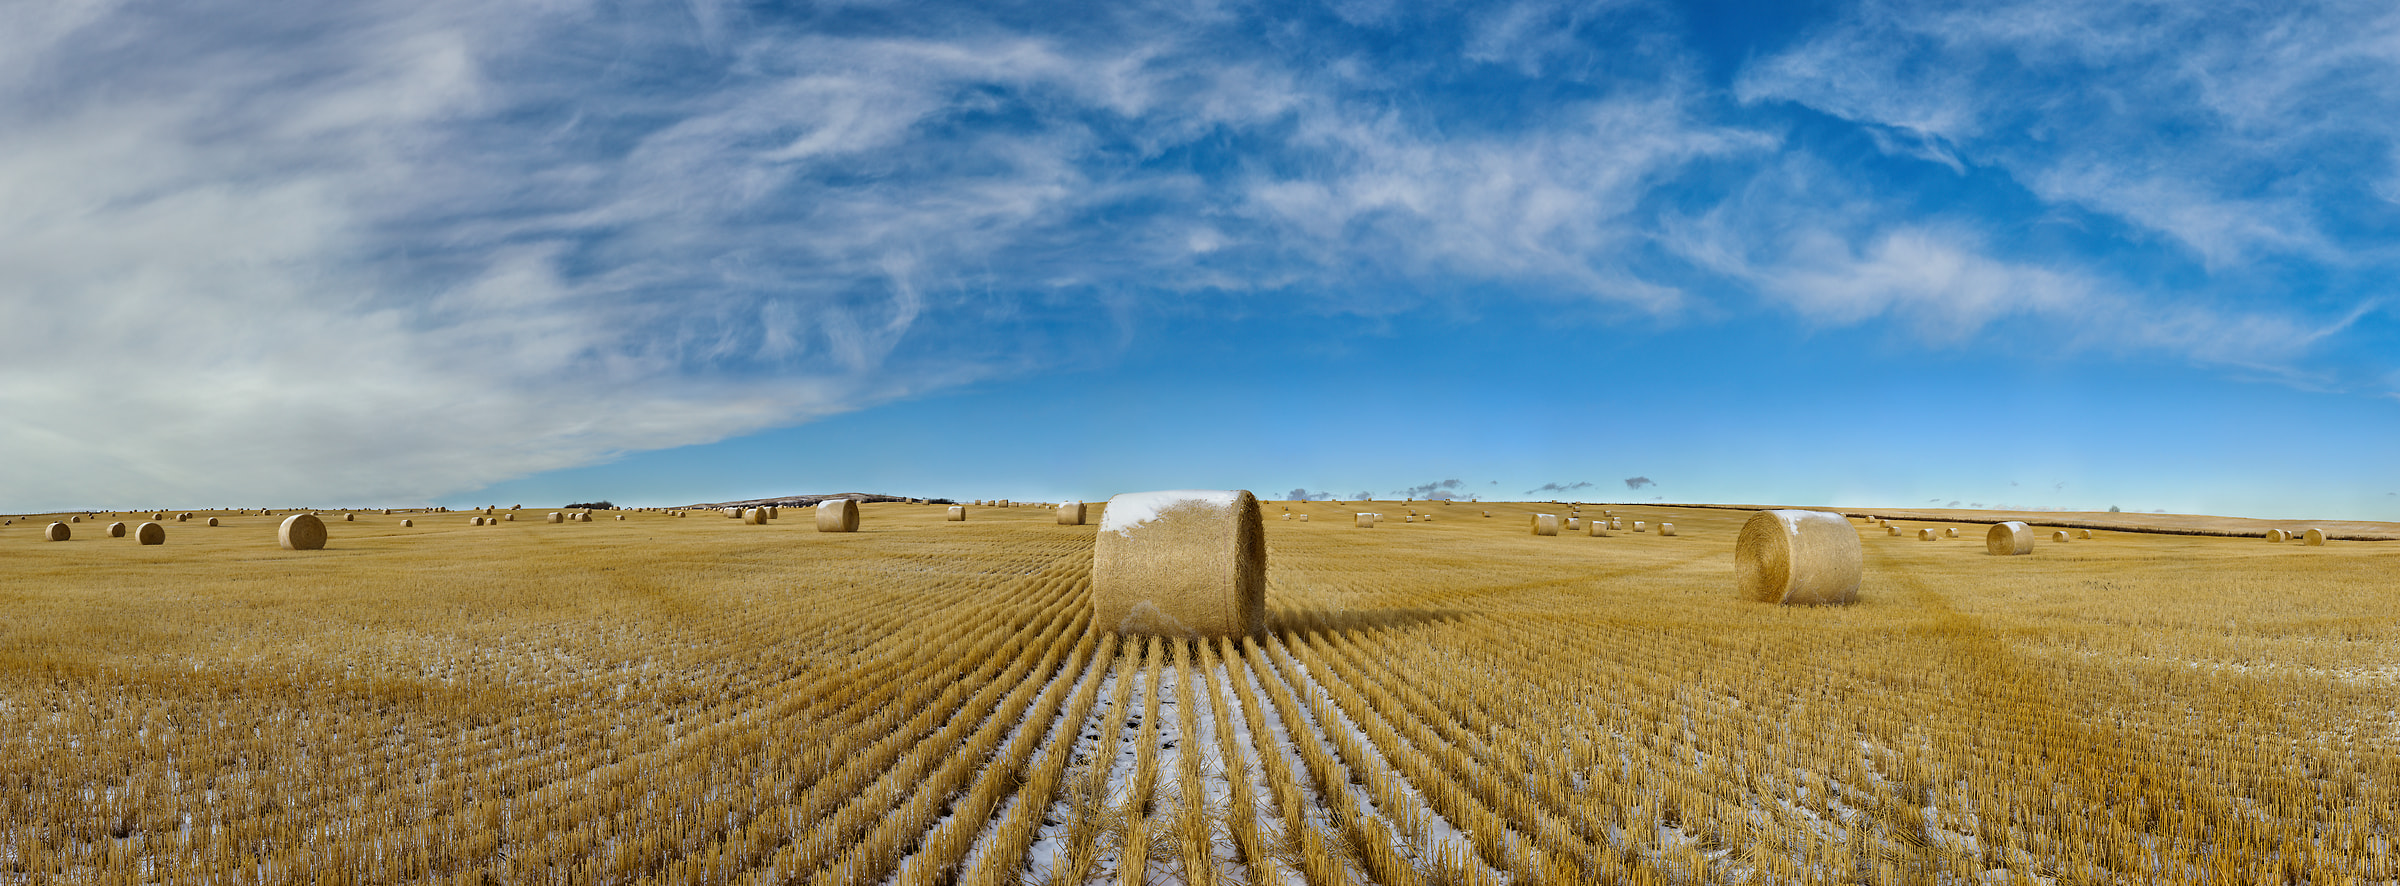 2,729 megapixels! A very high resolution, large-format VAST panorama photo of hay fields; landscape photograph created by Scott Dimond in Vulcan County, Alberta, Canada